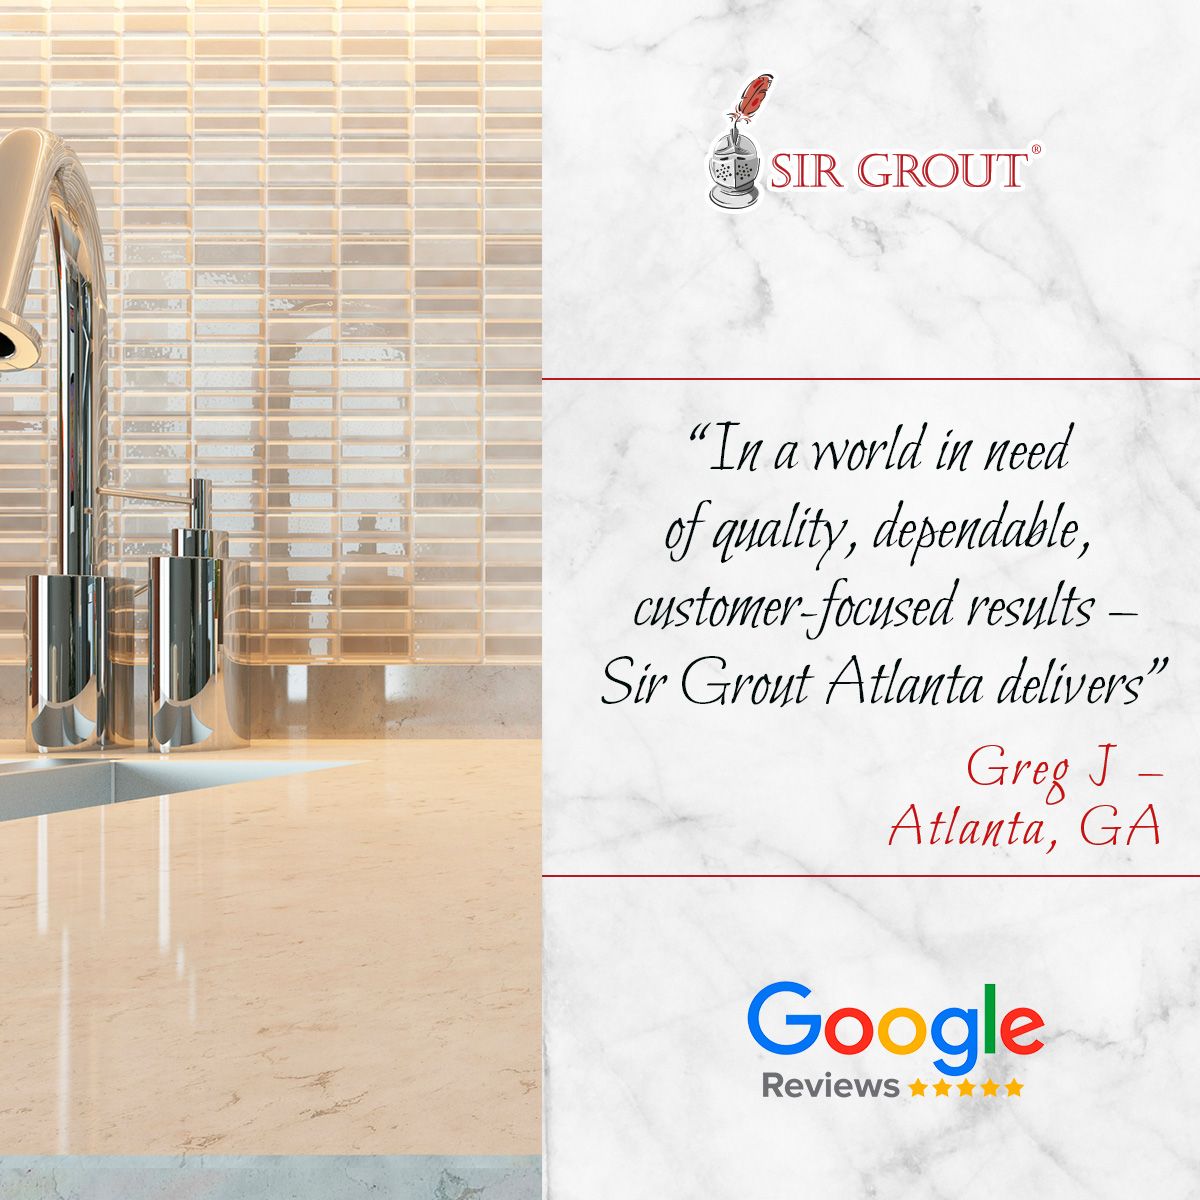 In a world in need of quality, dependable, customer-focused results – Sir Grout Atlanta delivers.